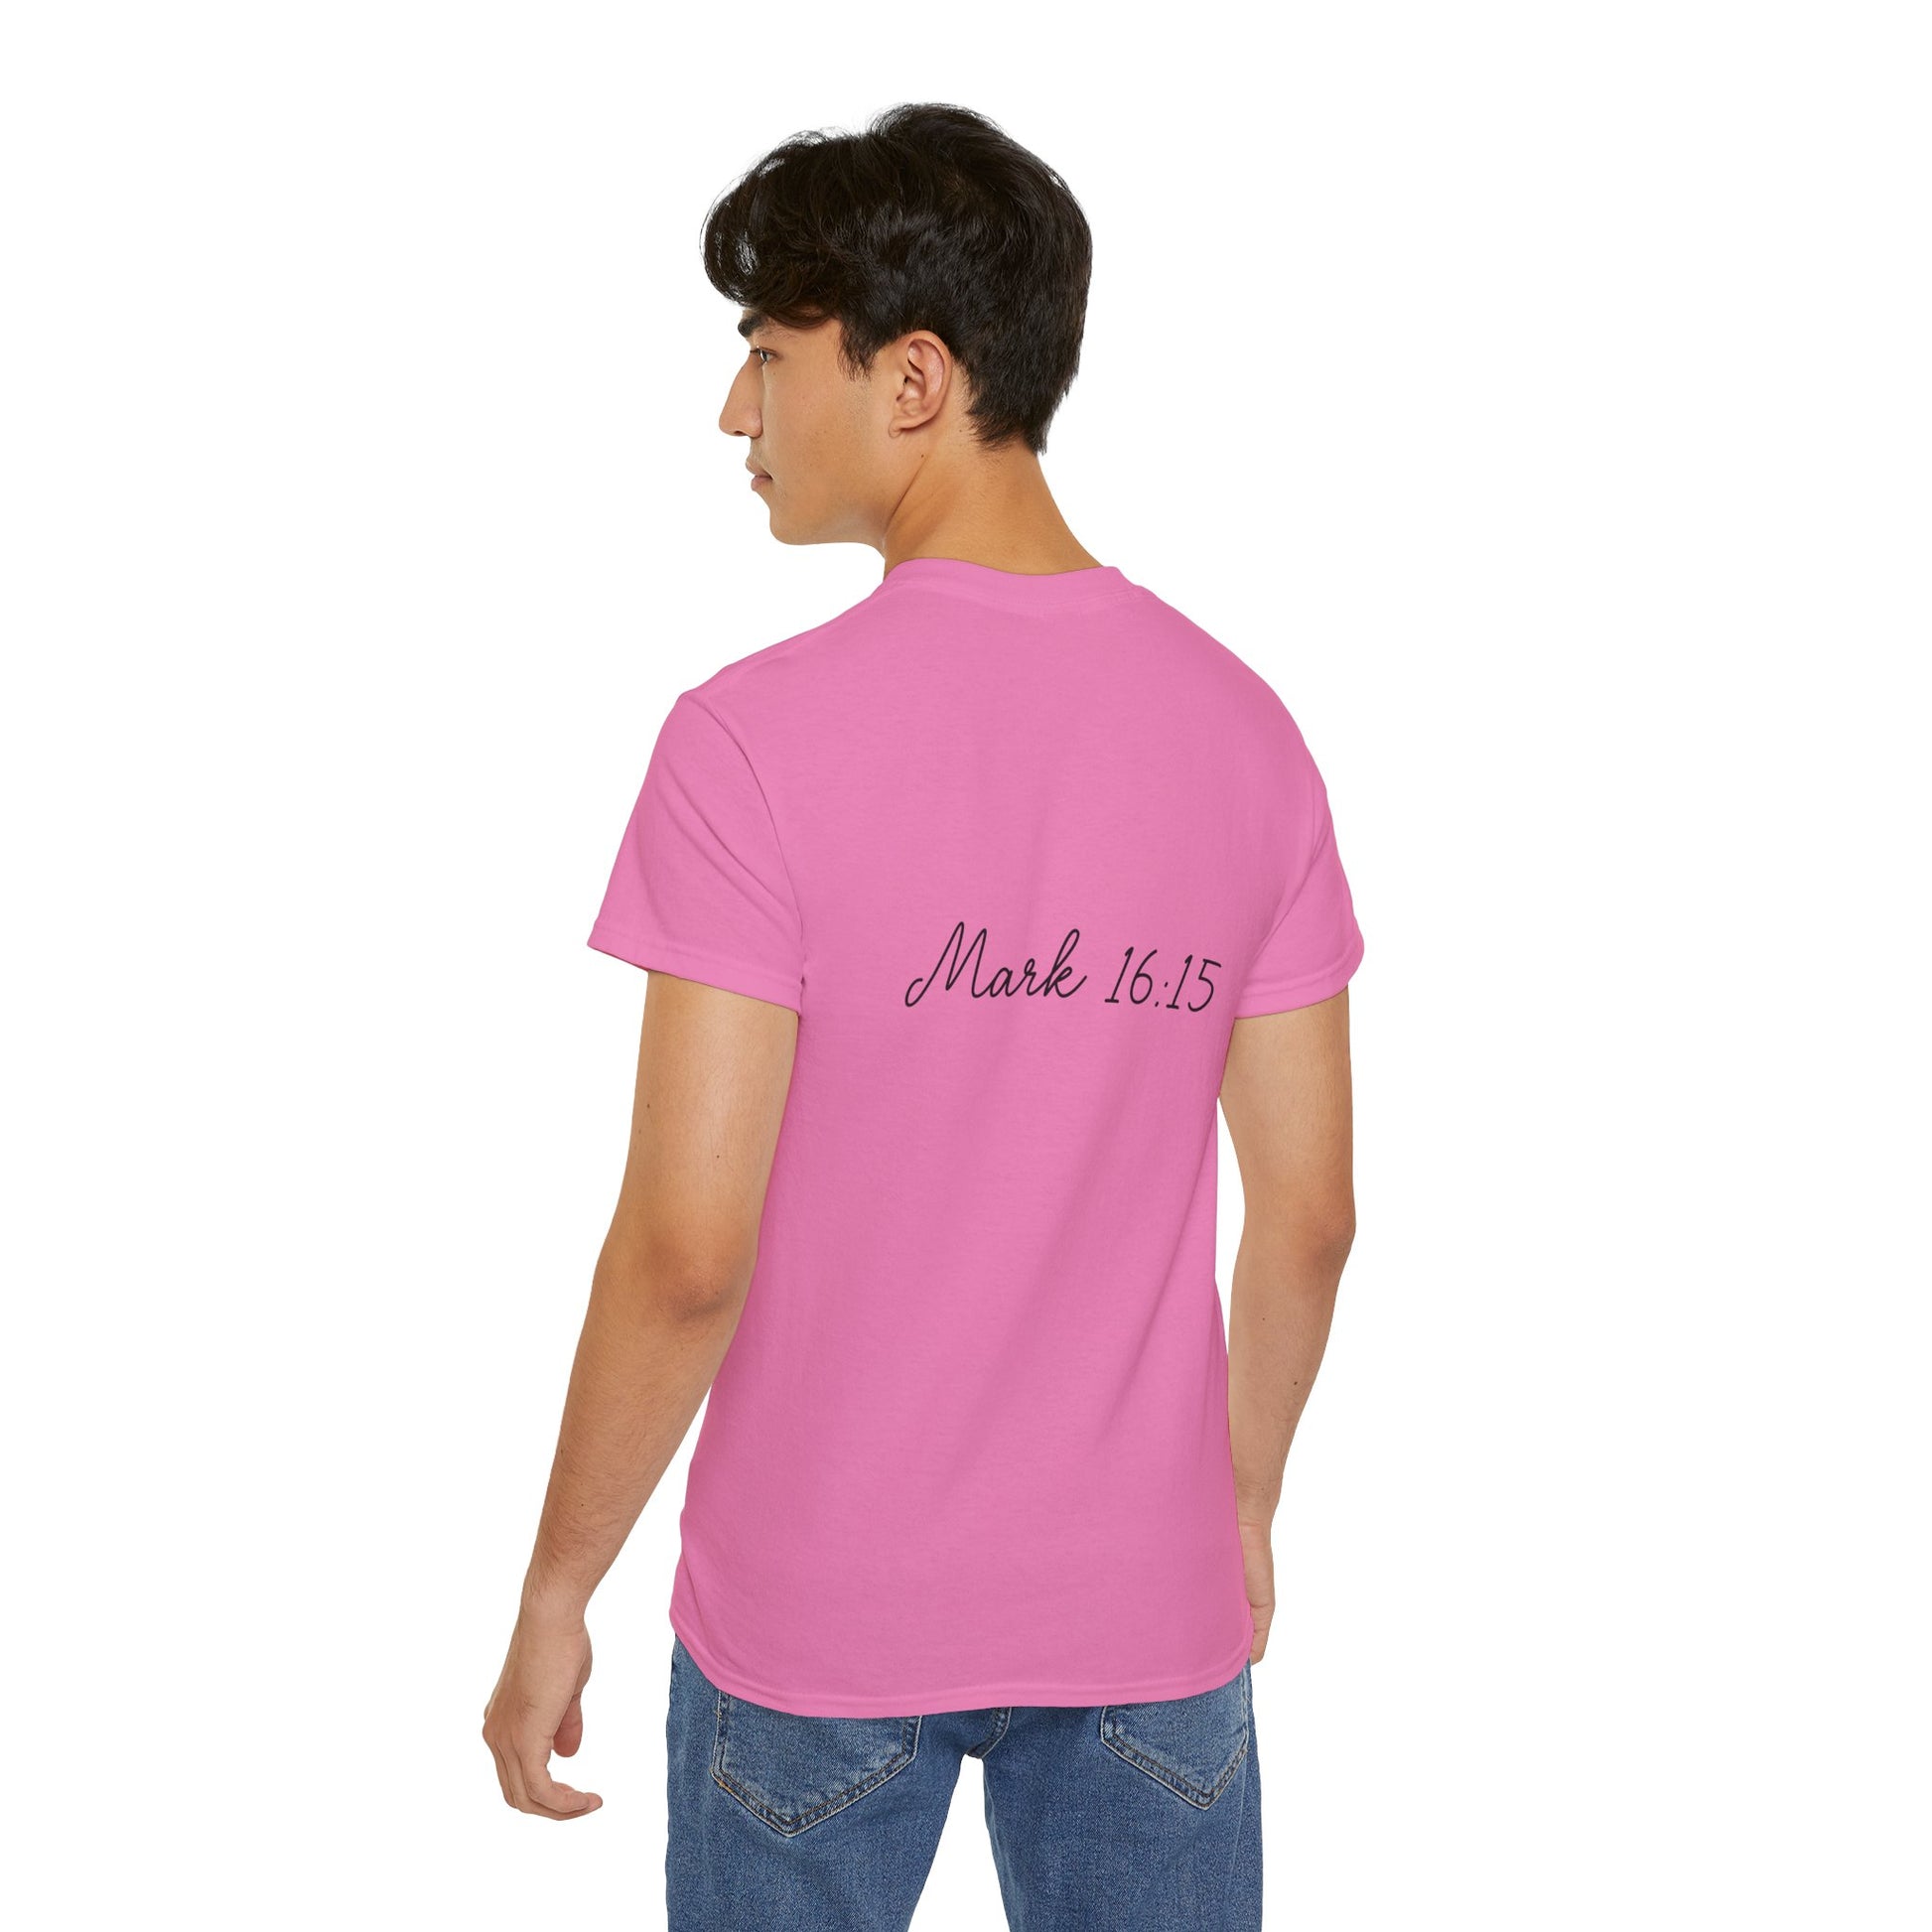 On A Mission From God Unisex Christian Ultra Cotton Tee Printify